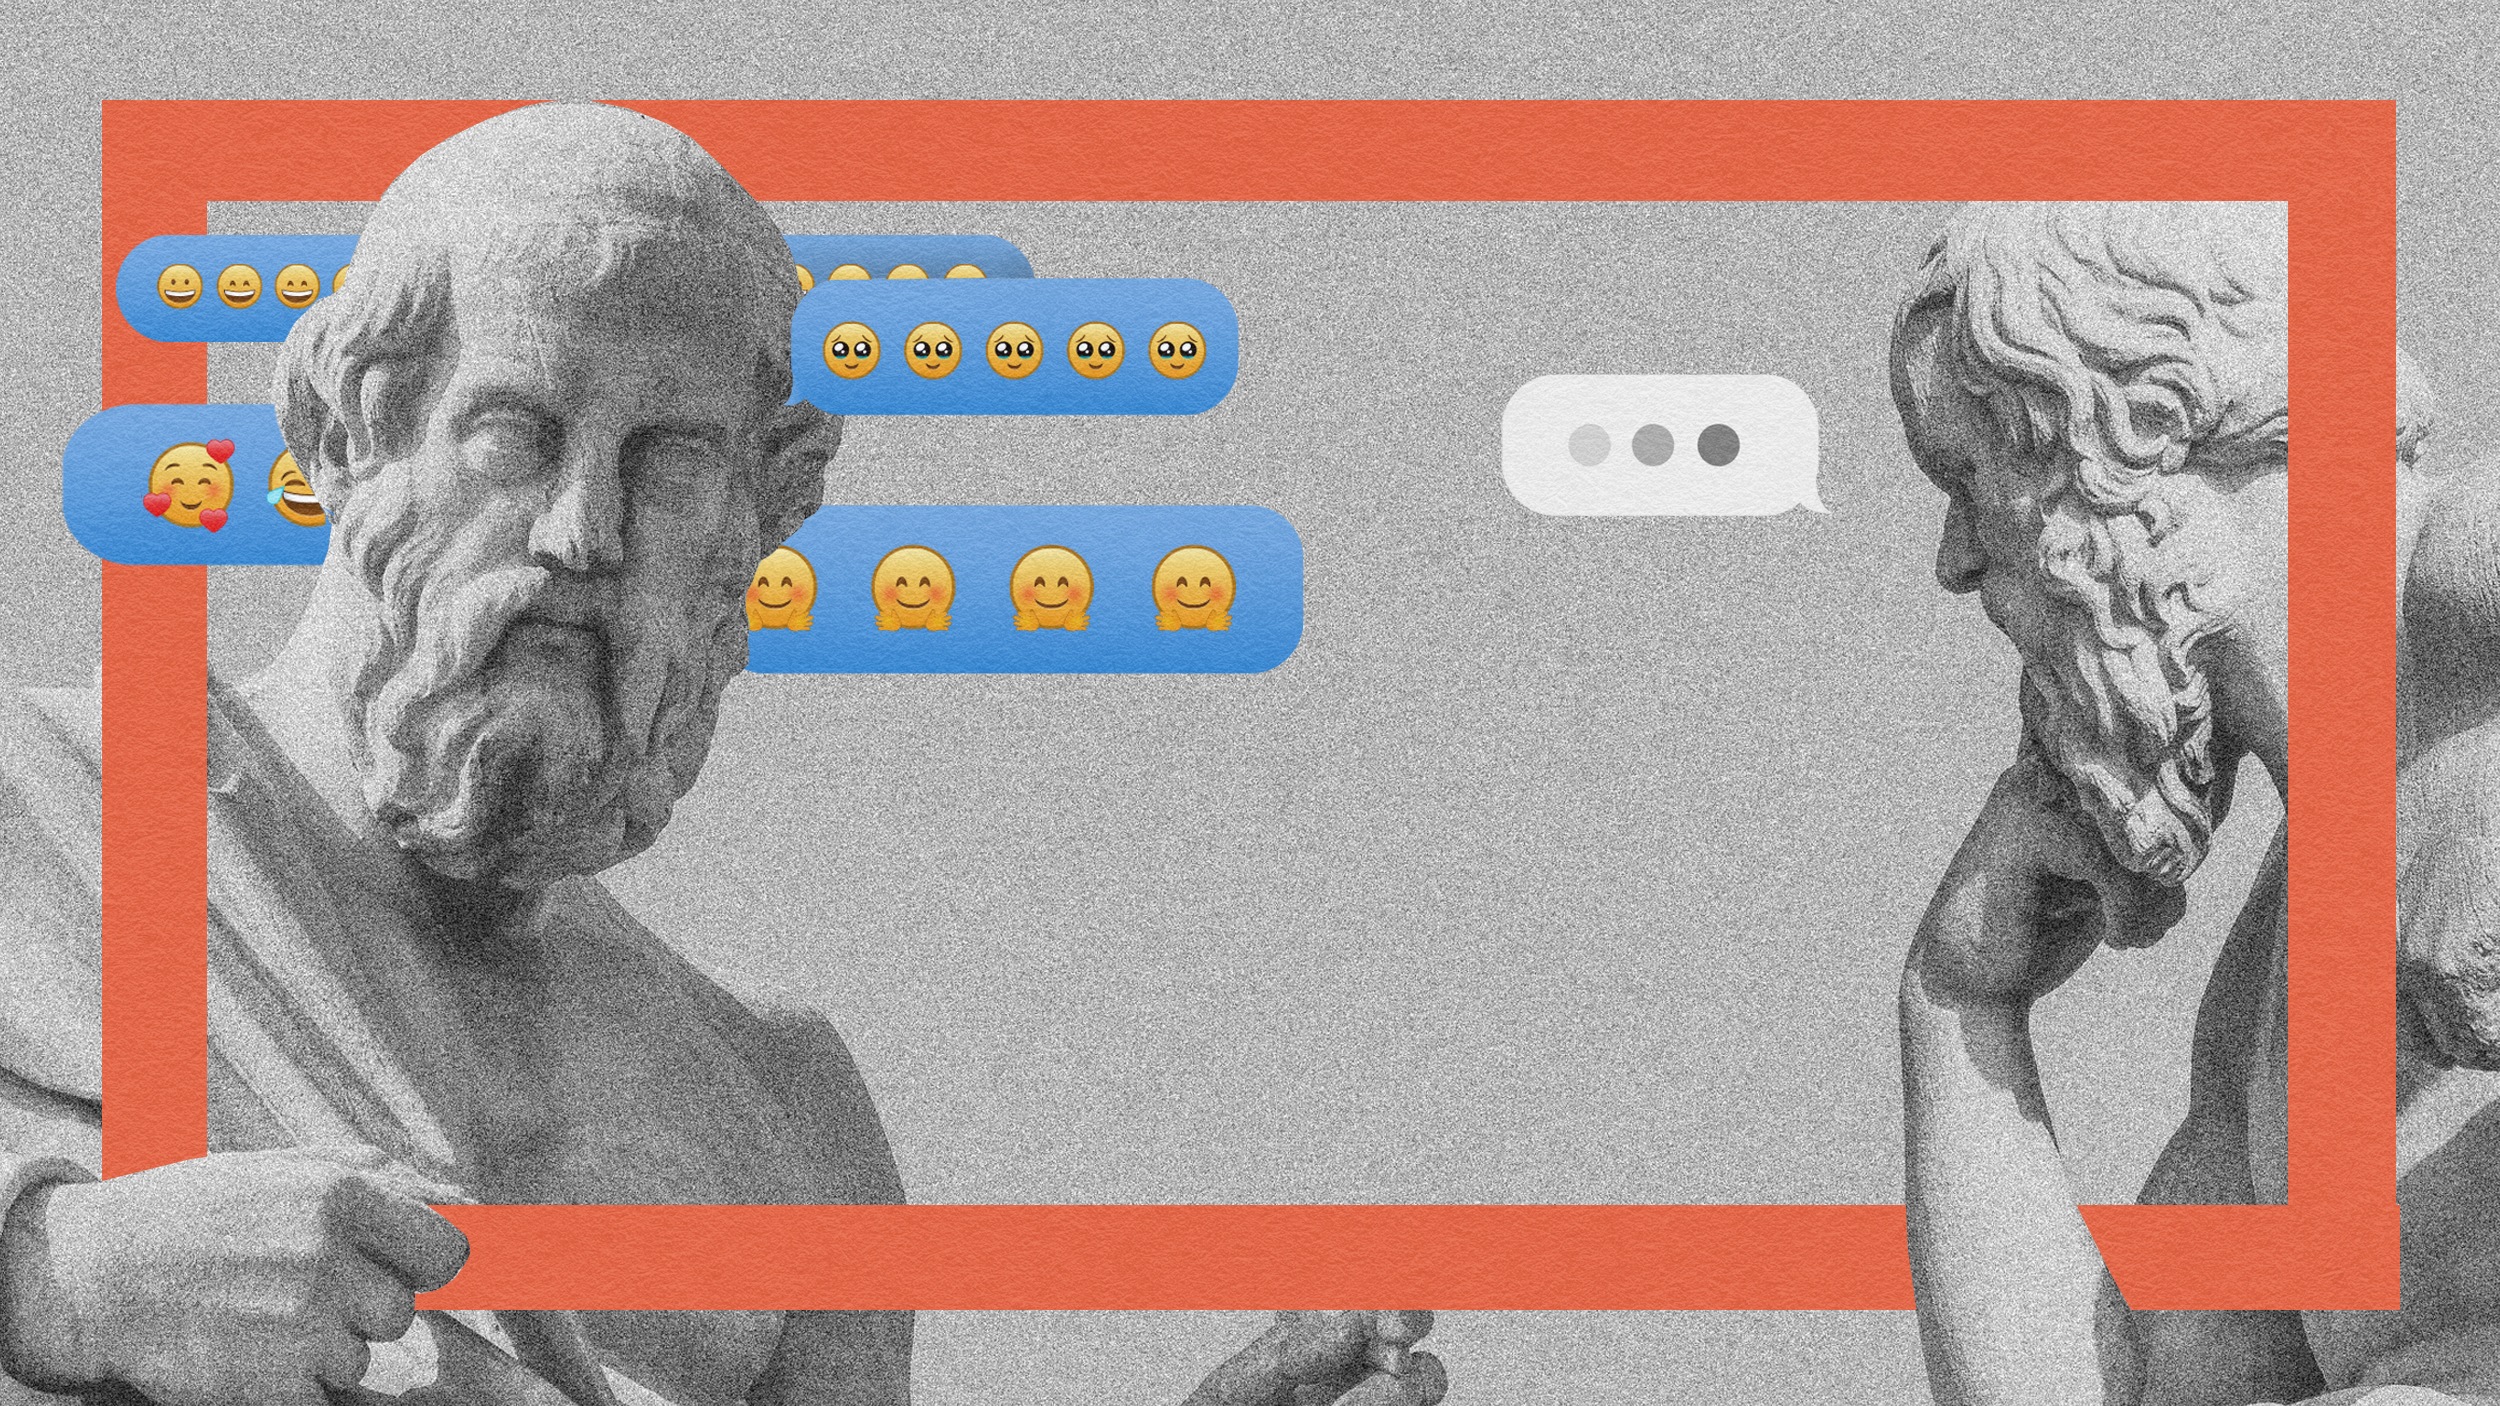 Two ancient statues, framed by red lines, appear to be conversing through modern emoji speech bubbles. One statue displays several emojis, while the other shows a typing indicator.